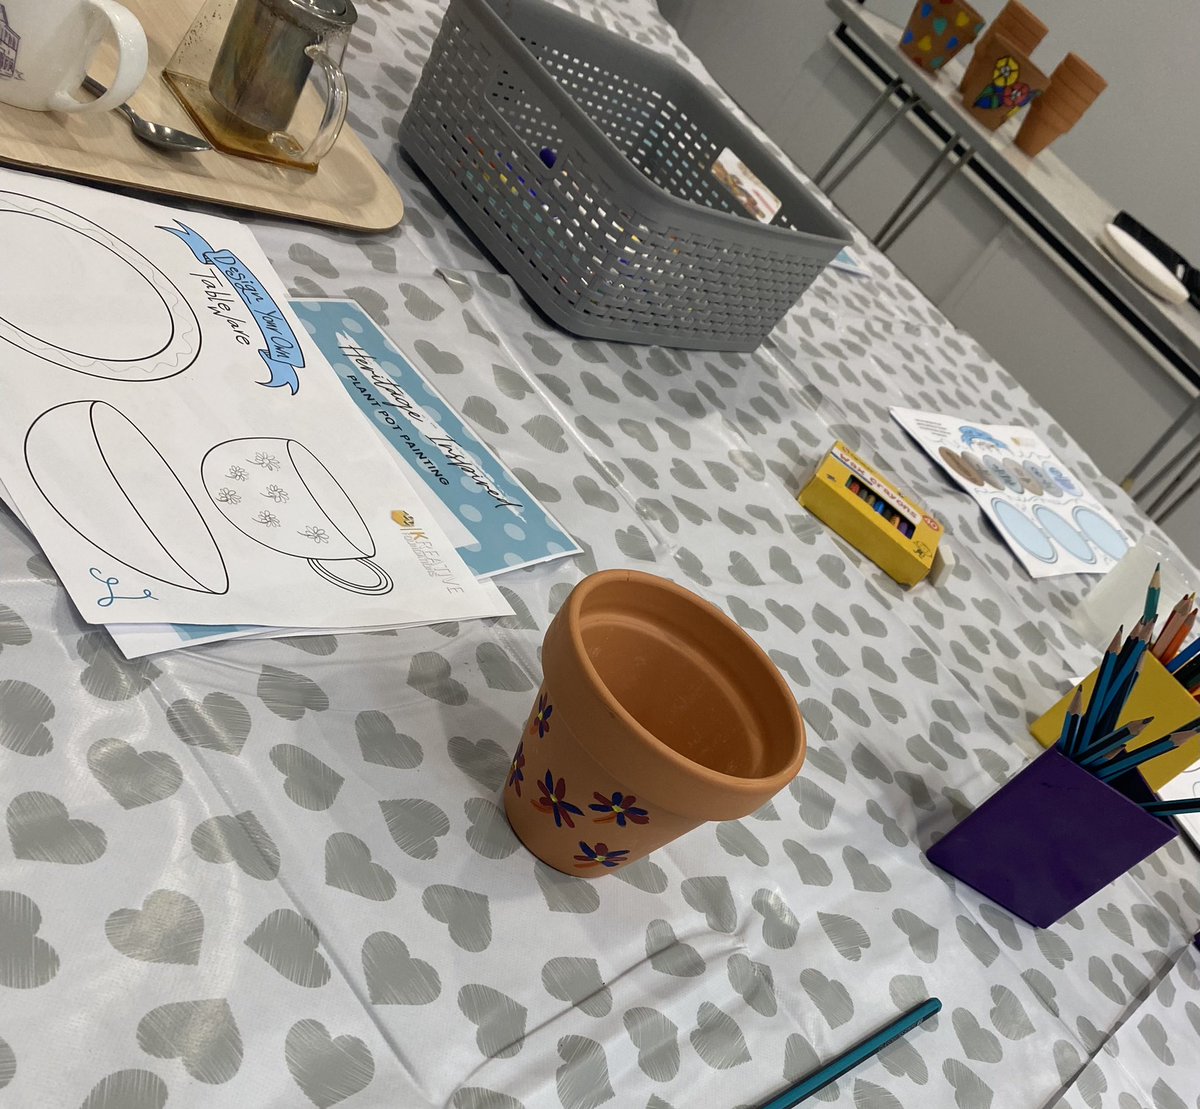 The weather didn’t bother us today @BramptonMuseum for our @NewVicTheatre #dementiafriendly session, it was so relaxing 😊Thanks to @KreativeFdns for inspiring us to create our own ‘backstamp’ & pottery design, sharing experiences related to our City’s heritage 🎨#artforwellbeing